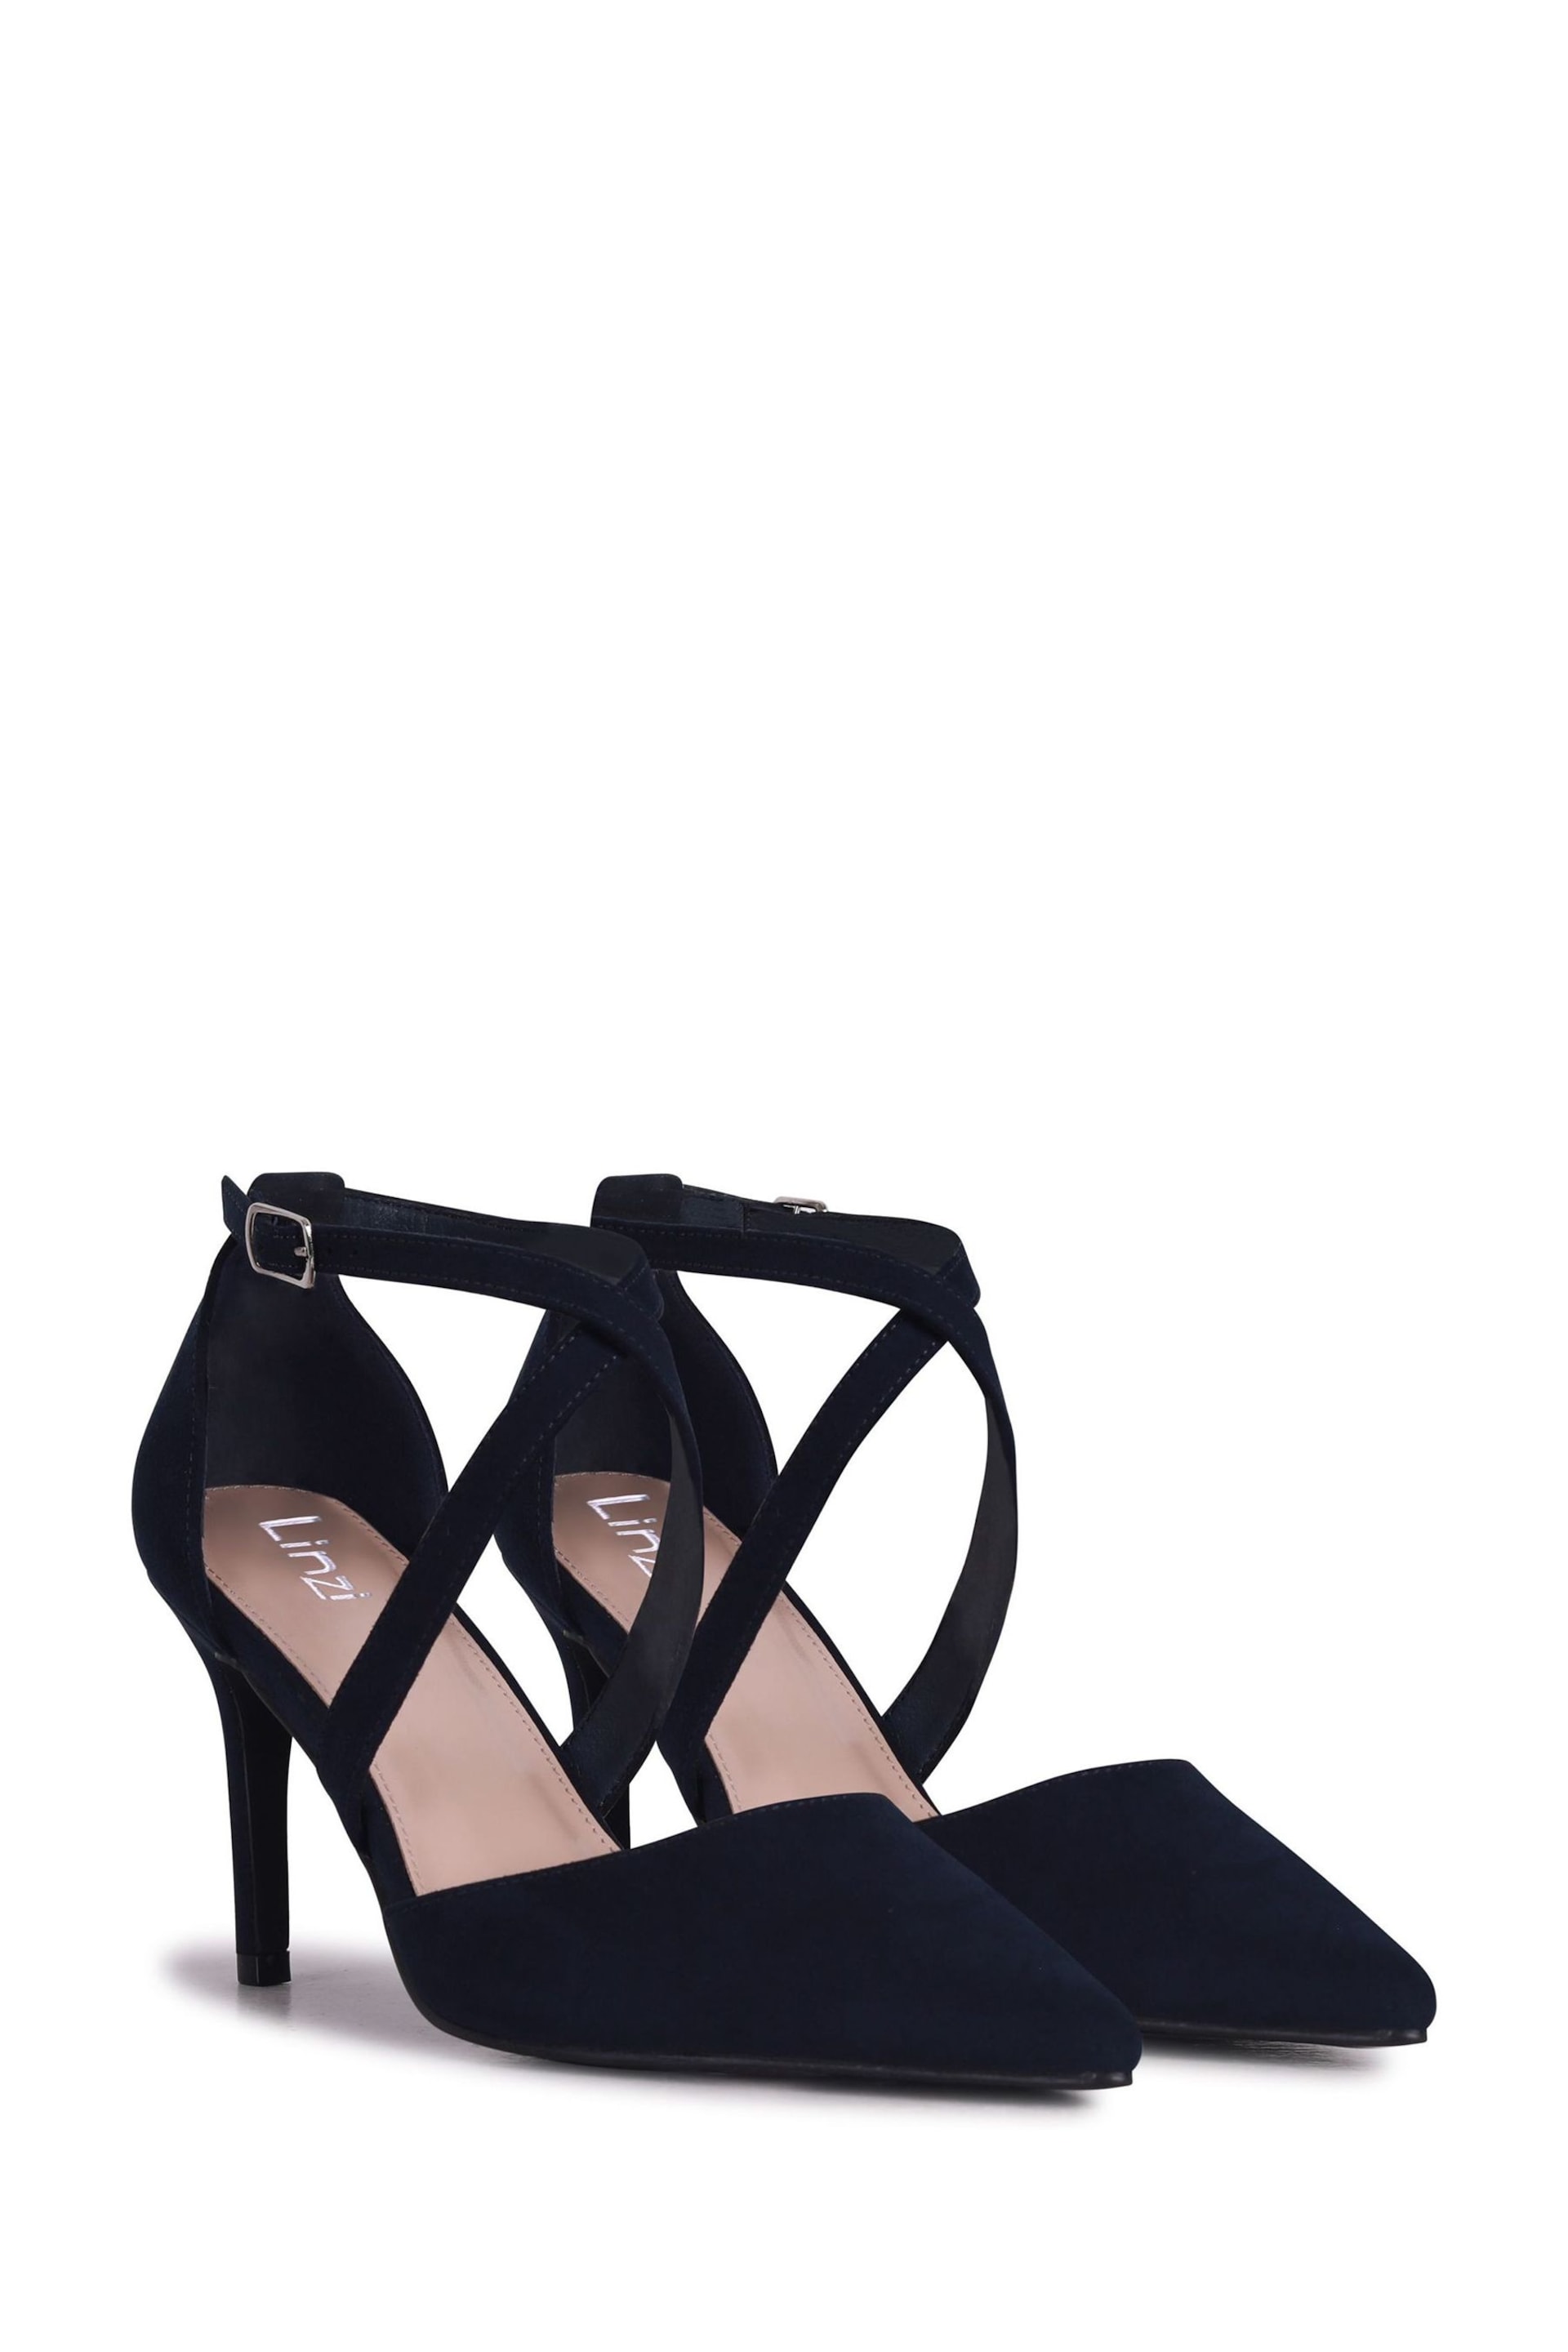 Linzi Blue Runway Stiletto Court Heels With Crossover Front Strap - Image 3 of 4